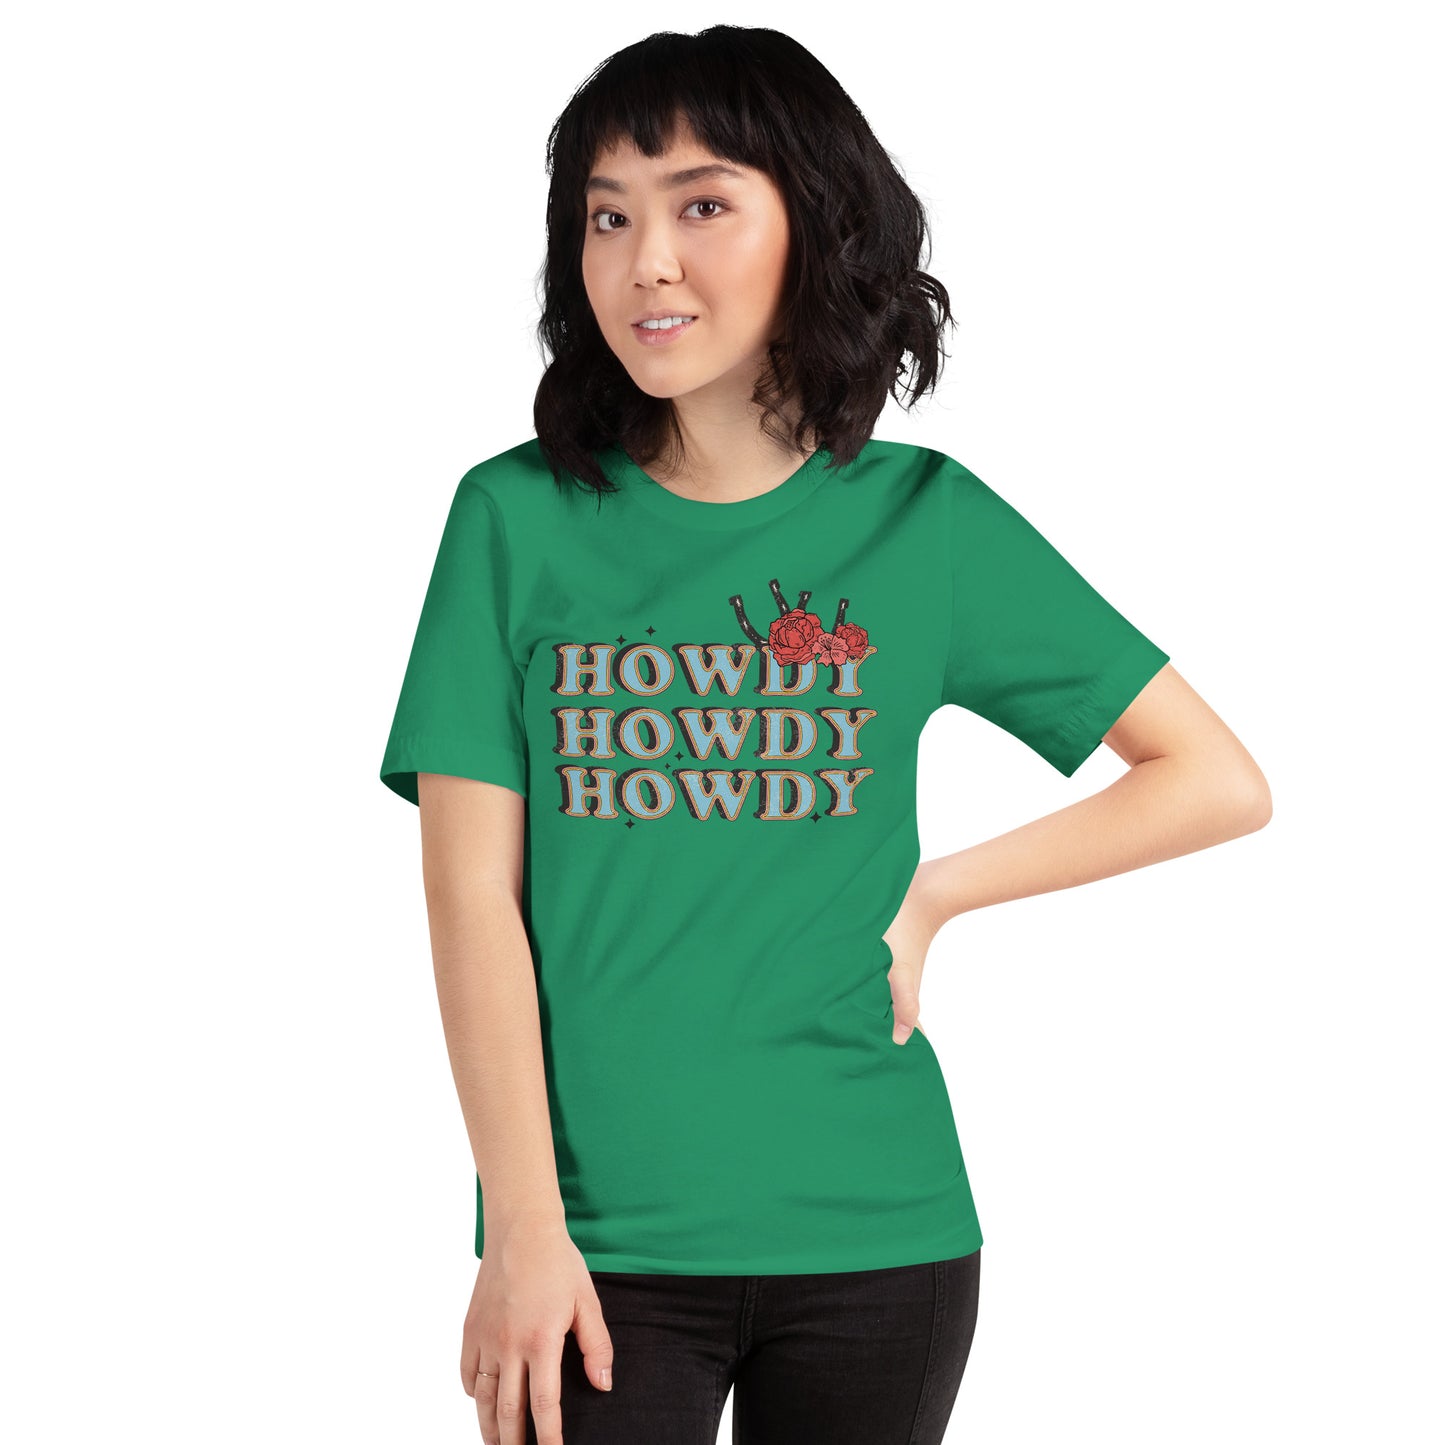 Howdy Howdy Howdy Country Southern Western Unisex t-shirt